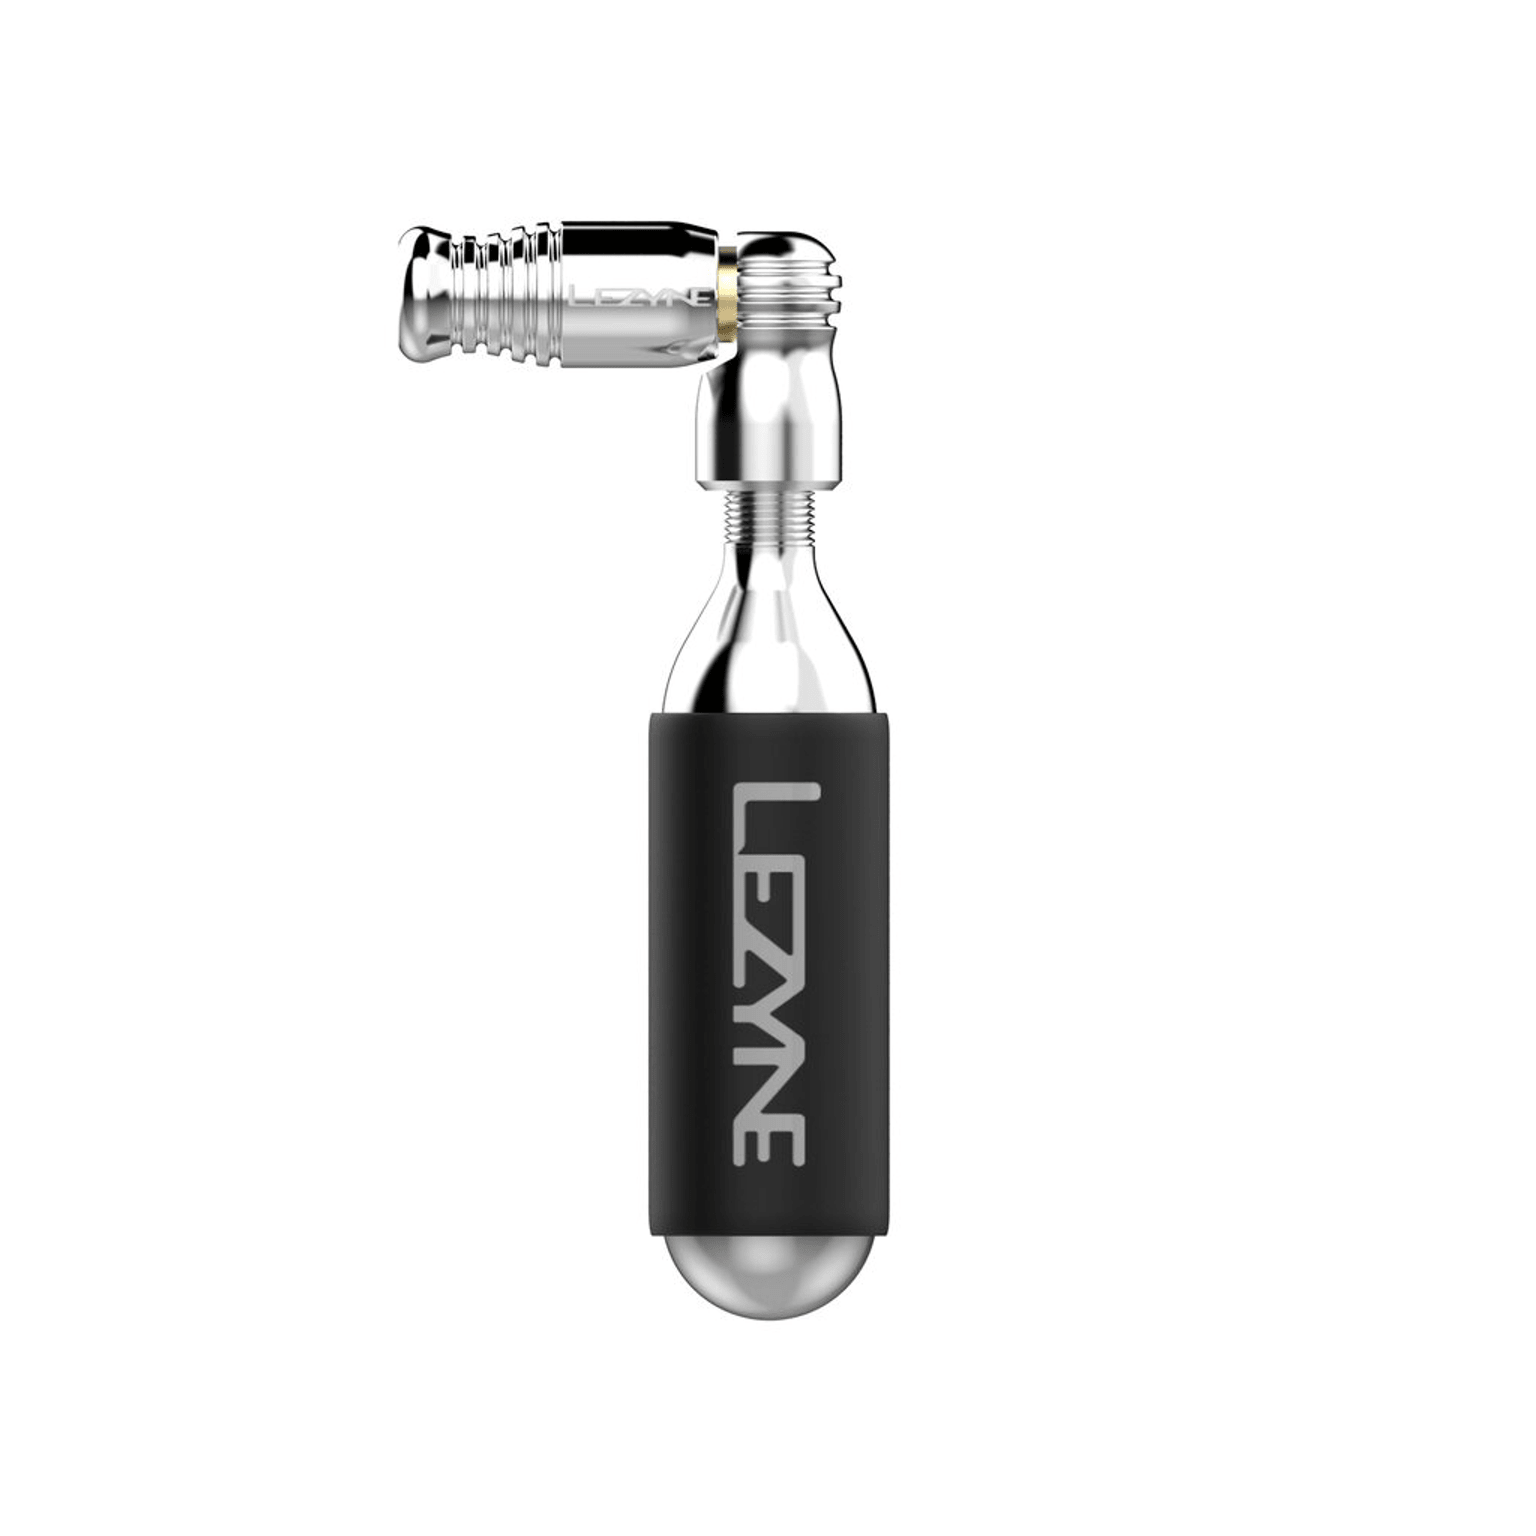 Lezyne Lezyne Trigger Speed Drive CO2 With 16G Cartridge Pompa per bici argento 2